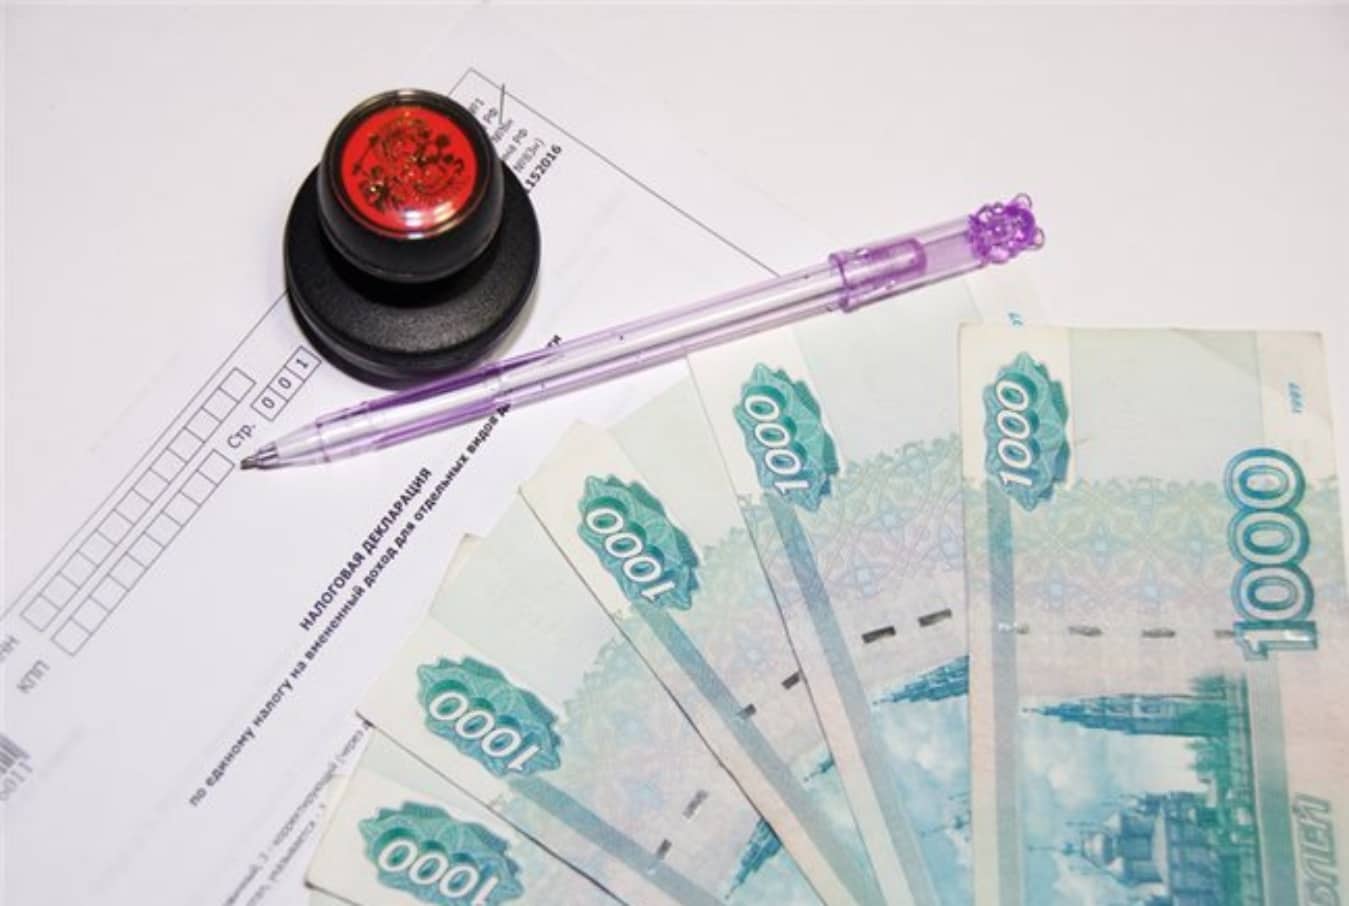 Leaky database exposes persona tax records of 20 million Russians